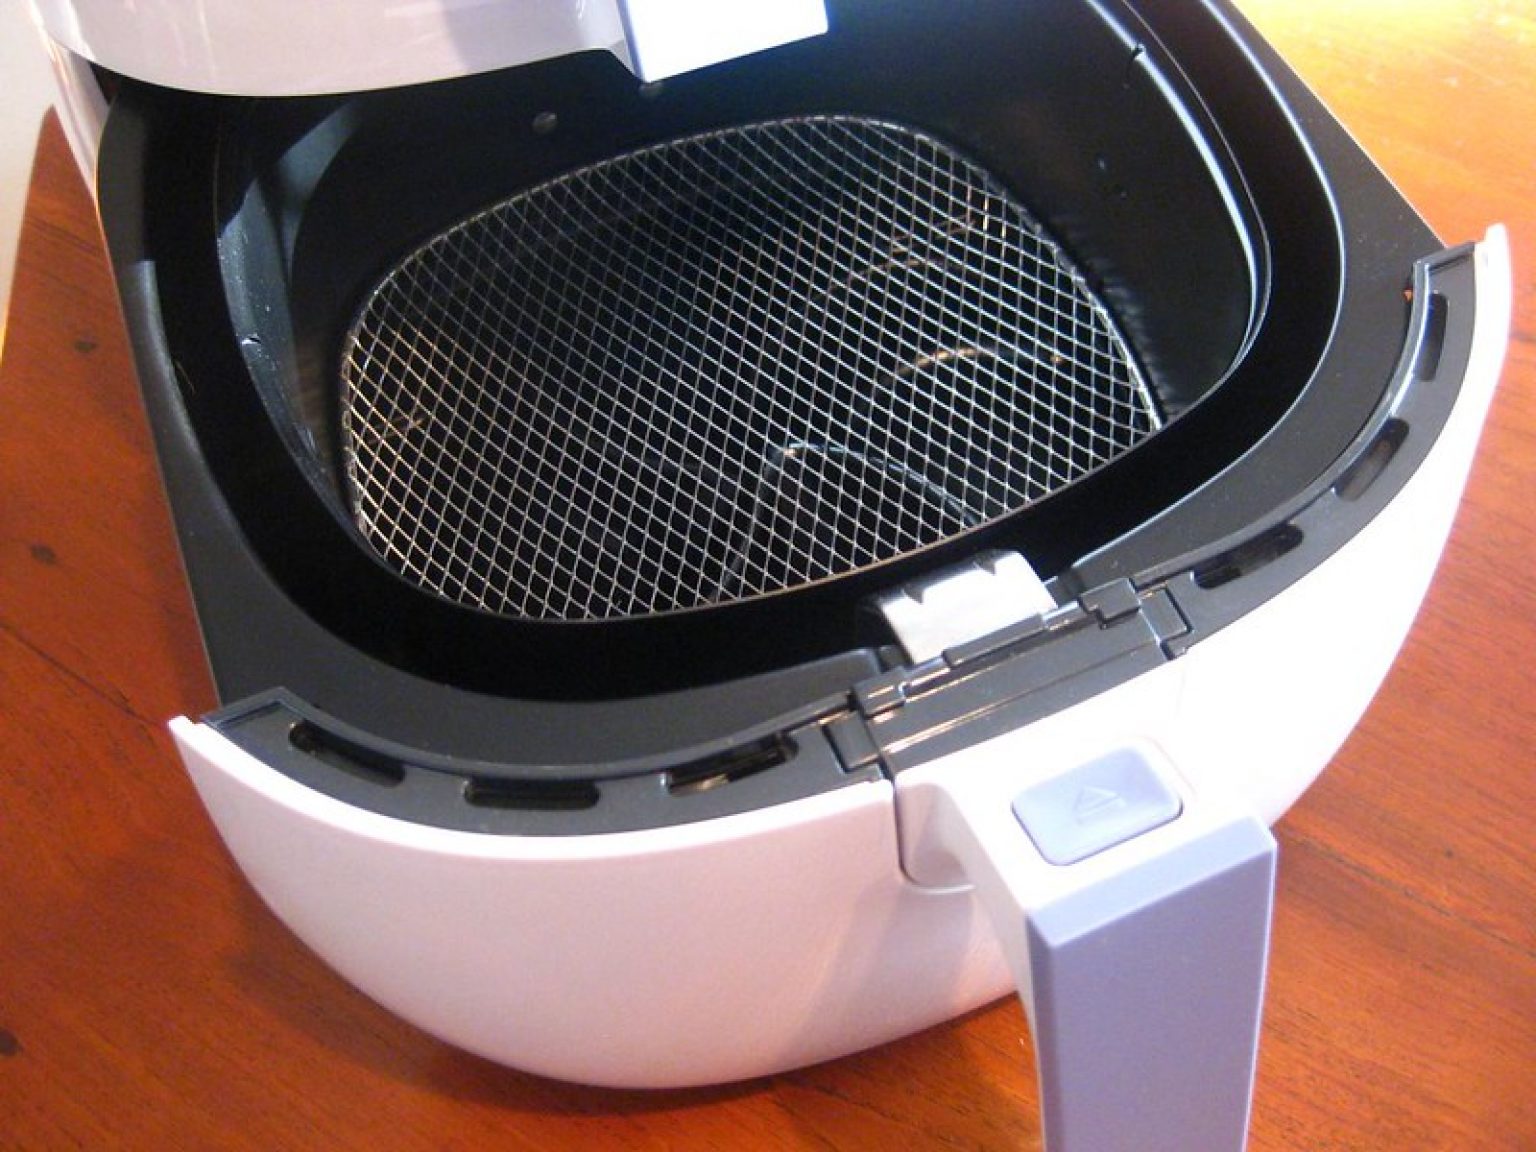 Causes And Solutions For Air Fryer Basket Peeling